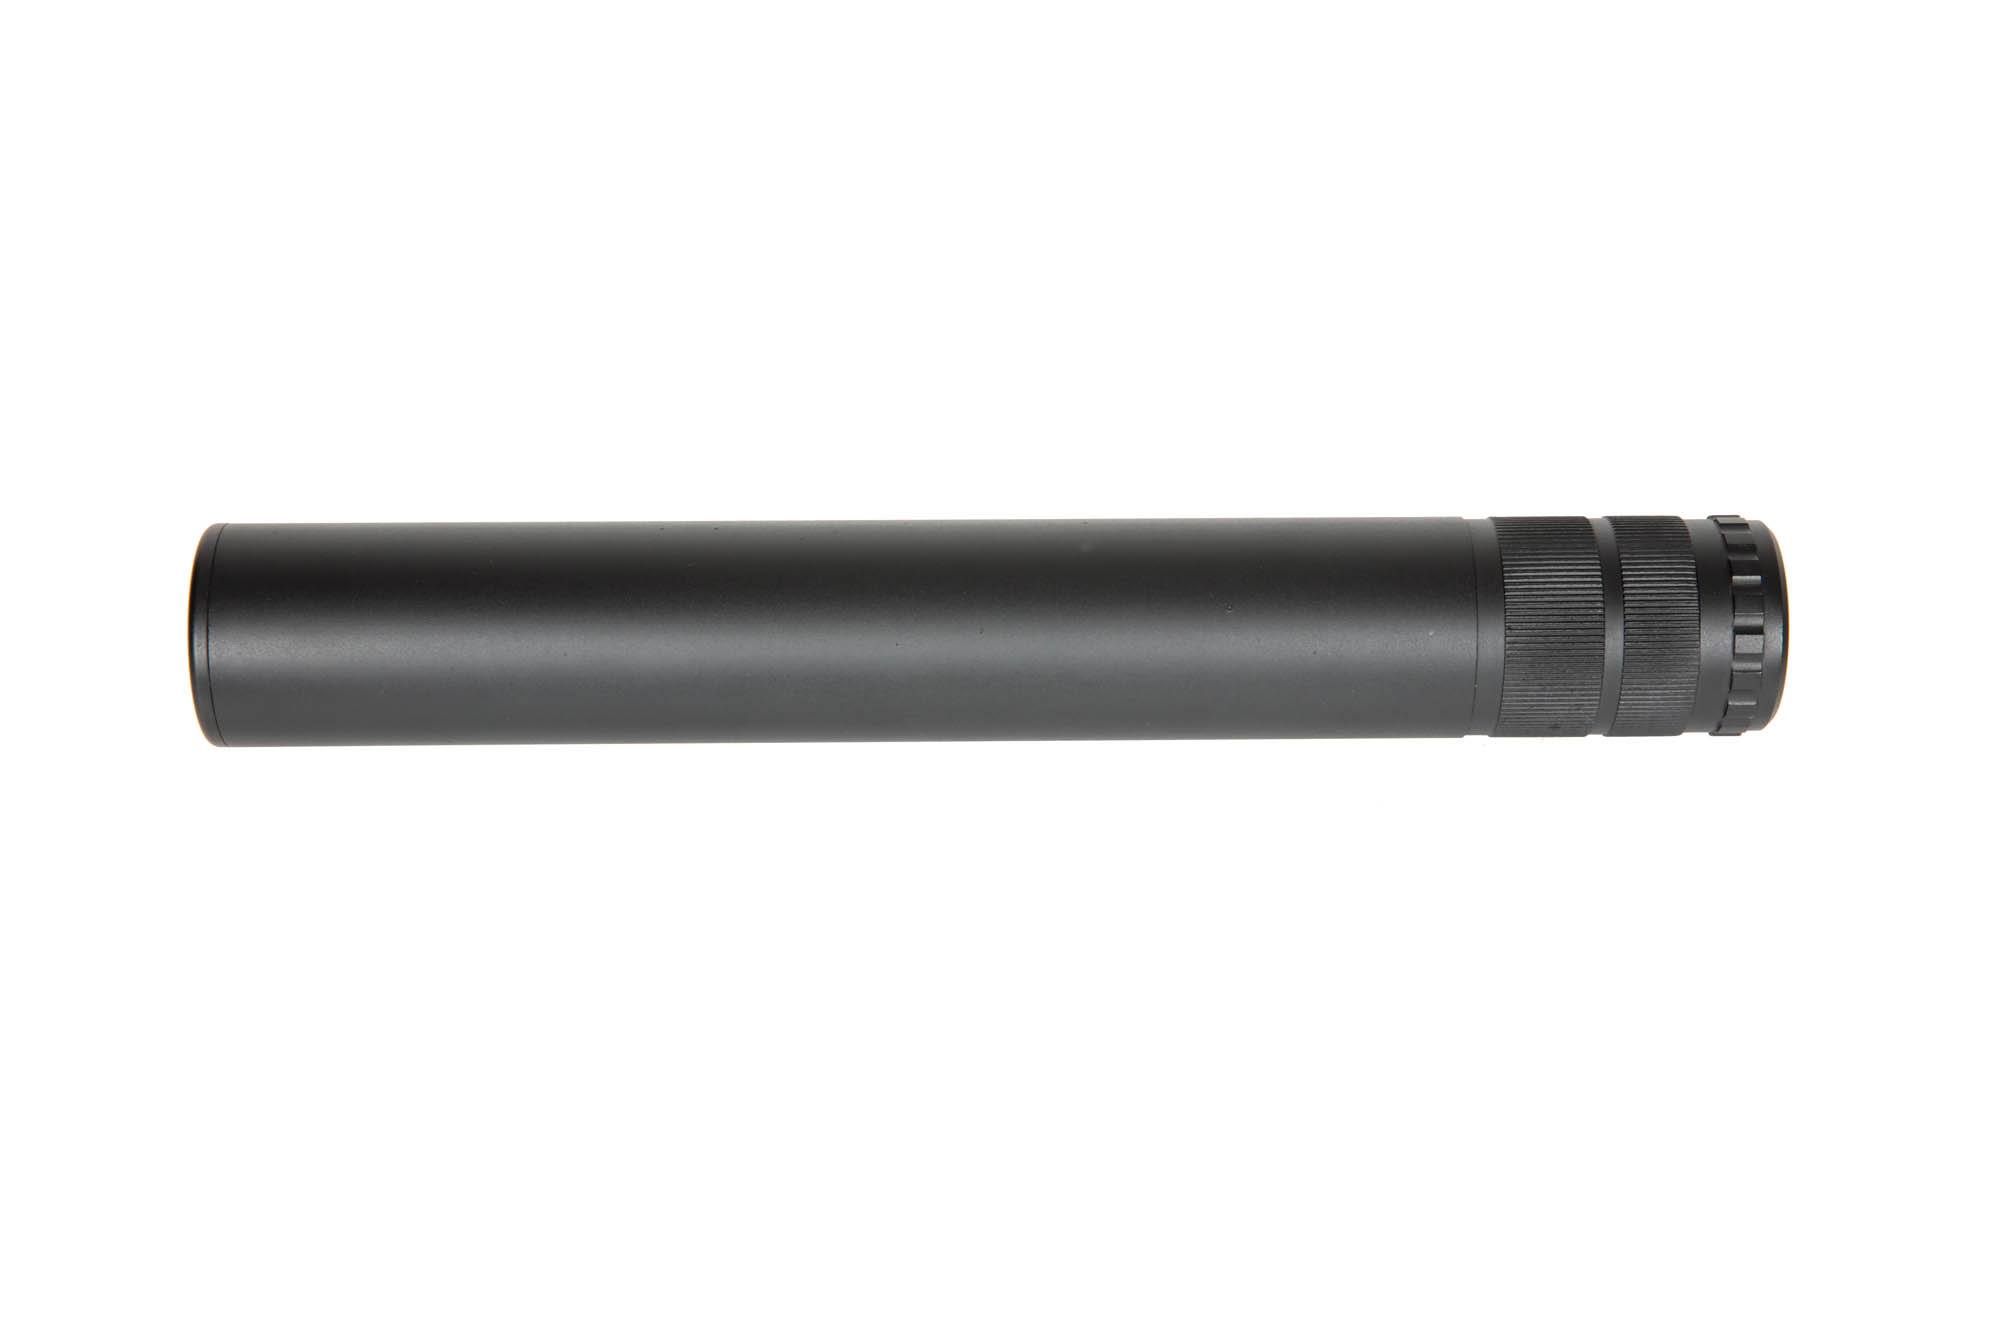 Sound Suppressor for SV-98 CORE ™ replicas by Specna Arms on Airsoft Mania Europe